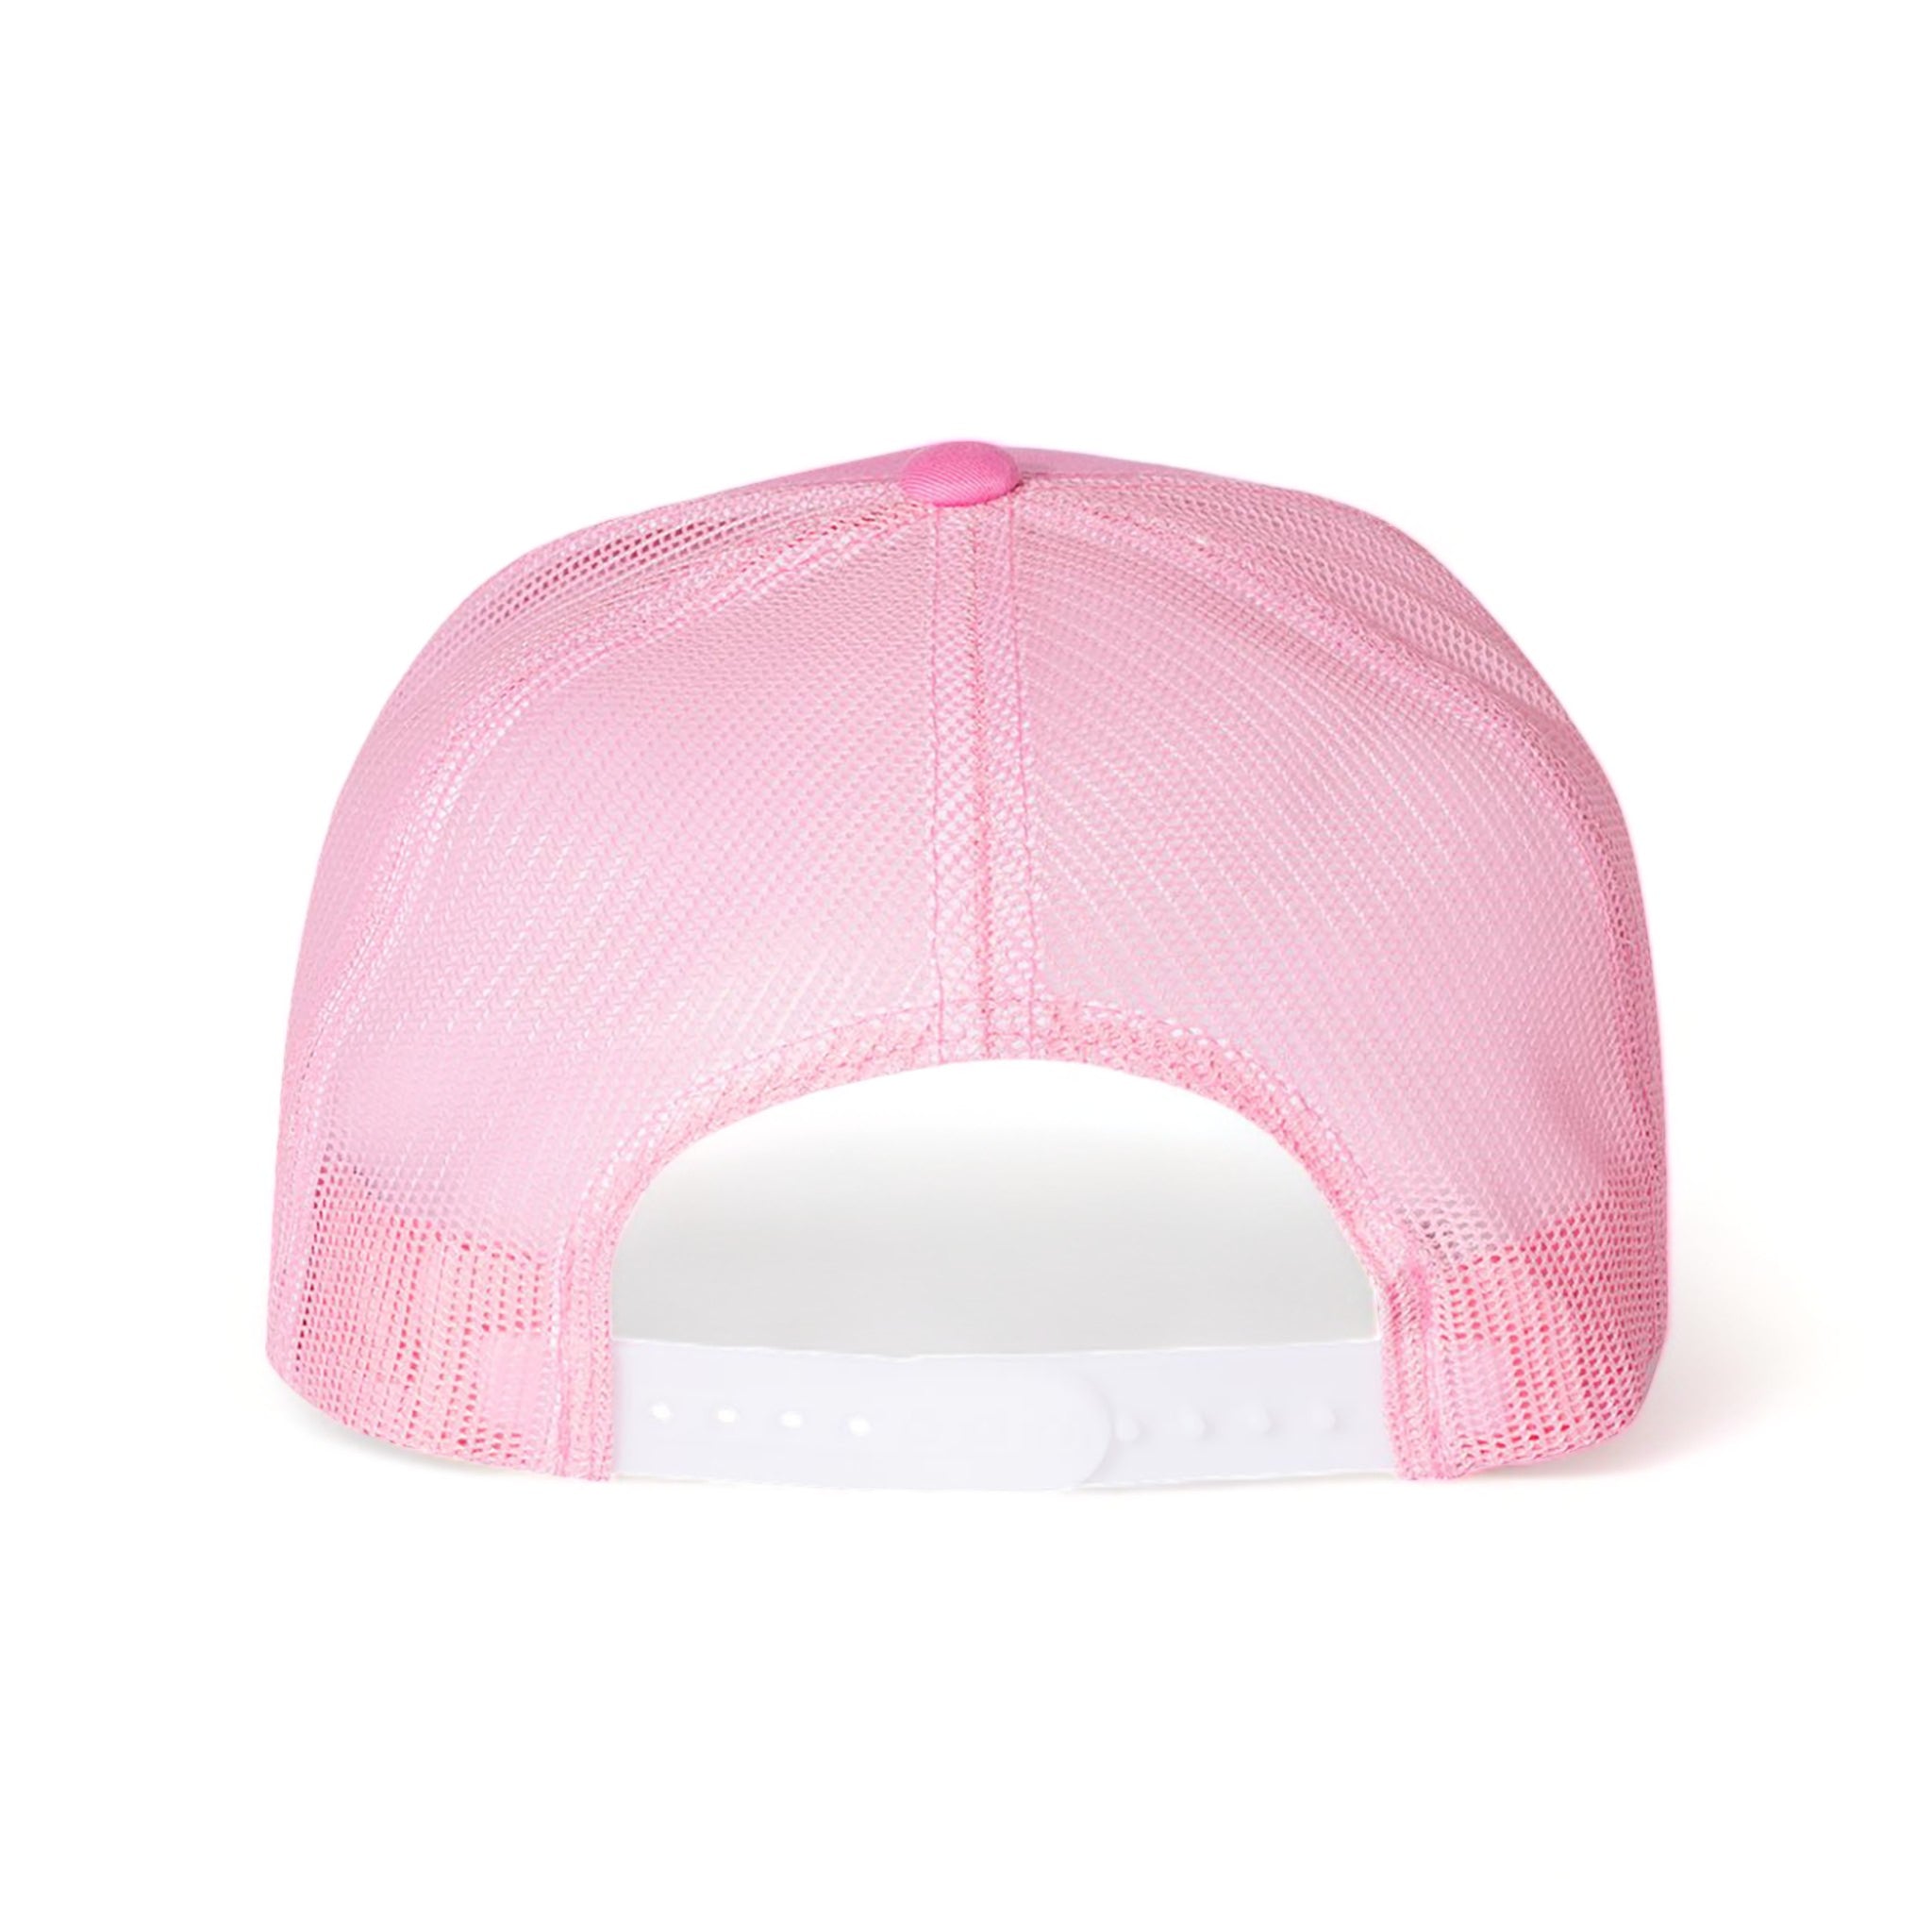 Back view of YP Classics 6006 custom hat in pink